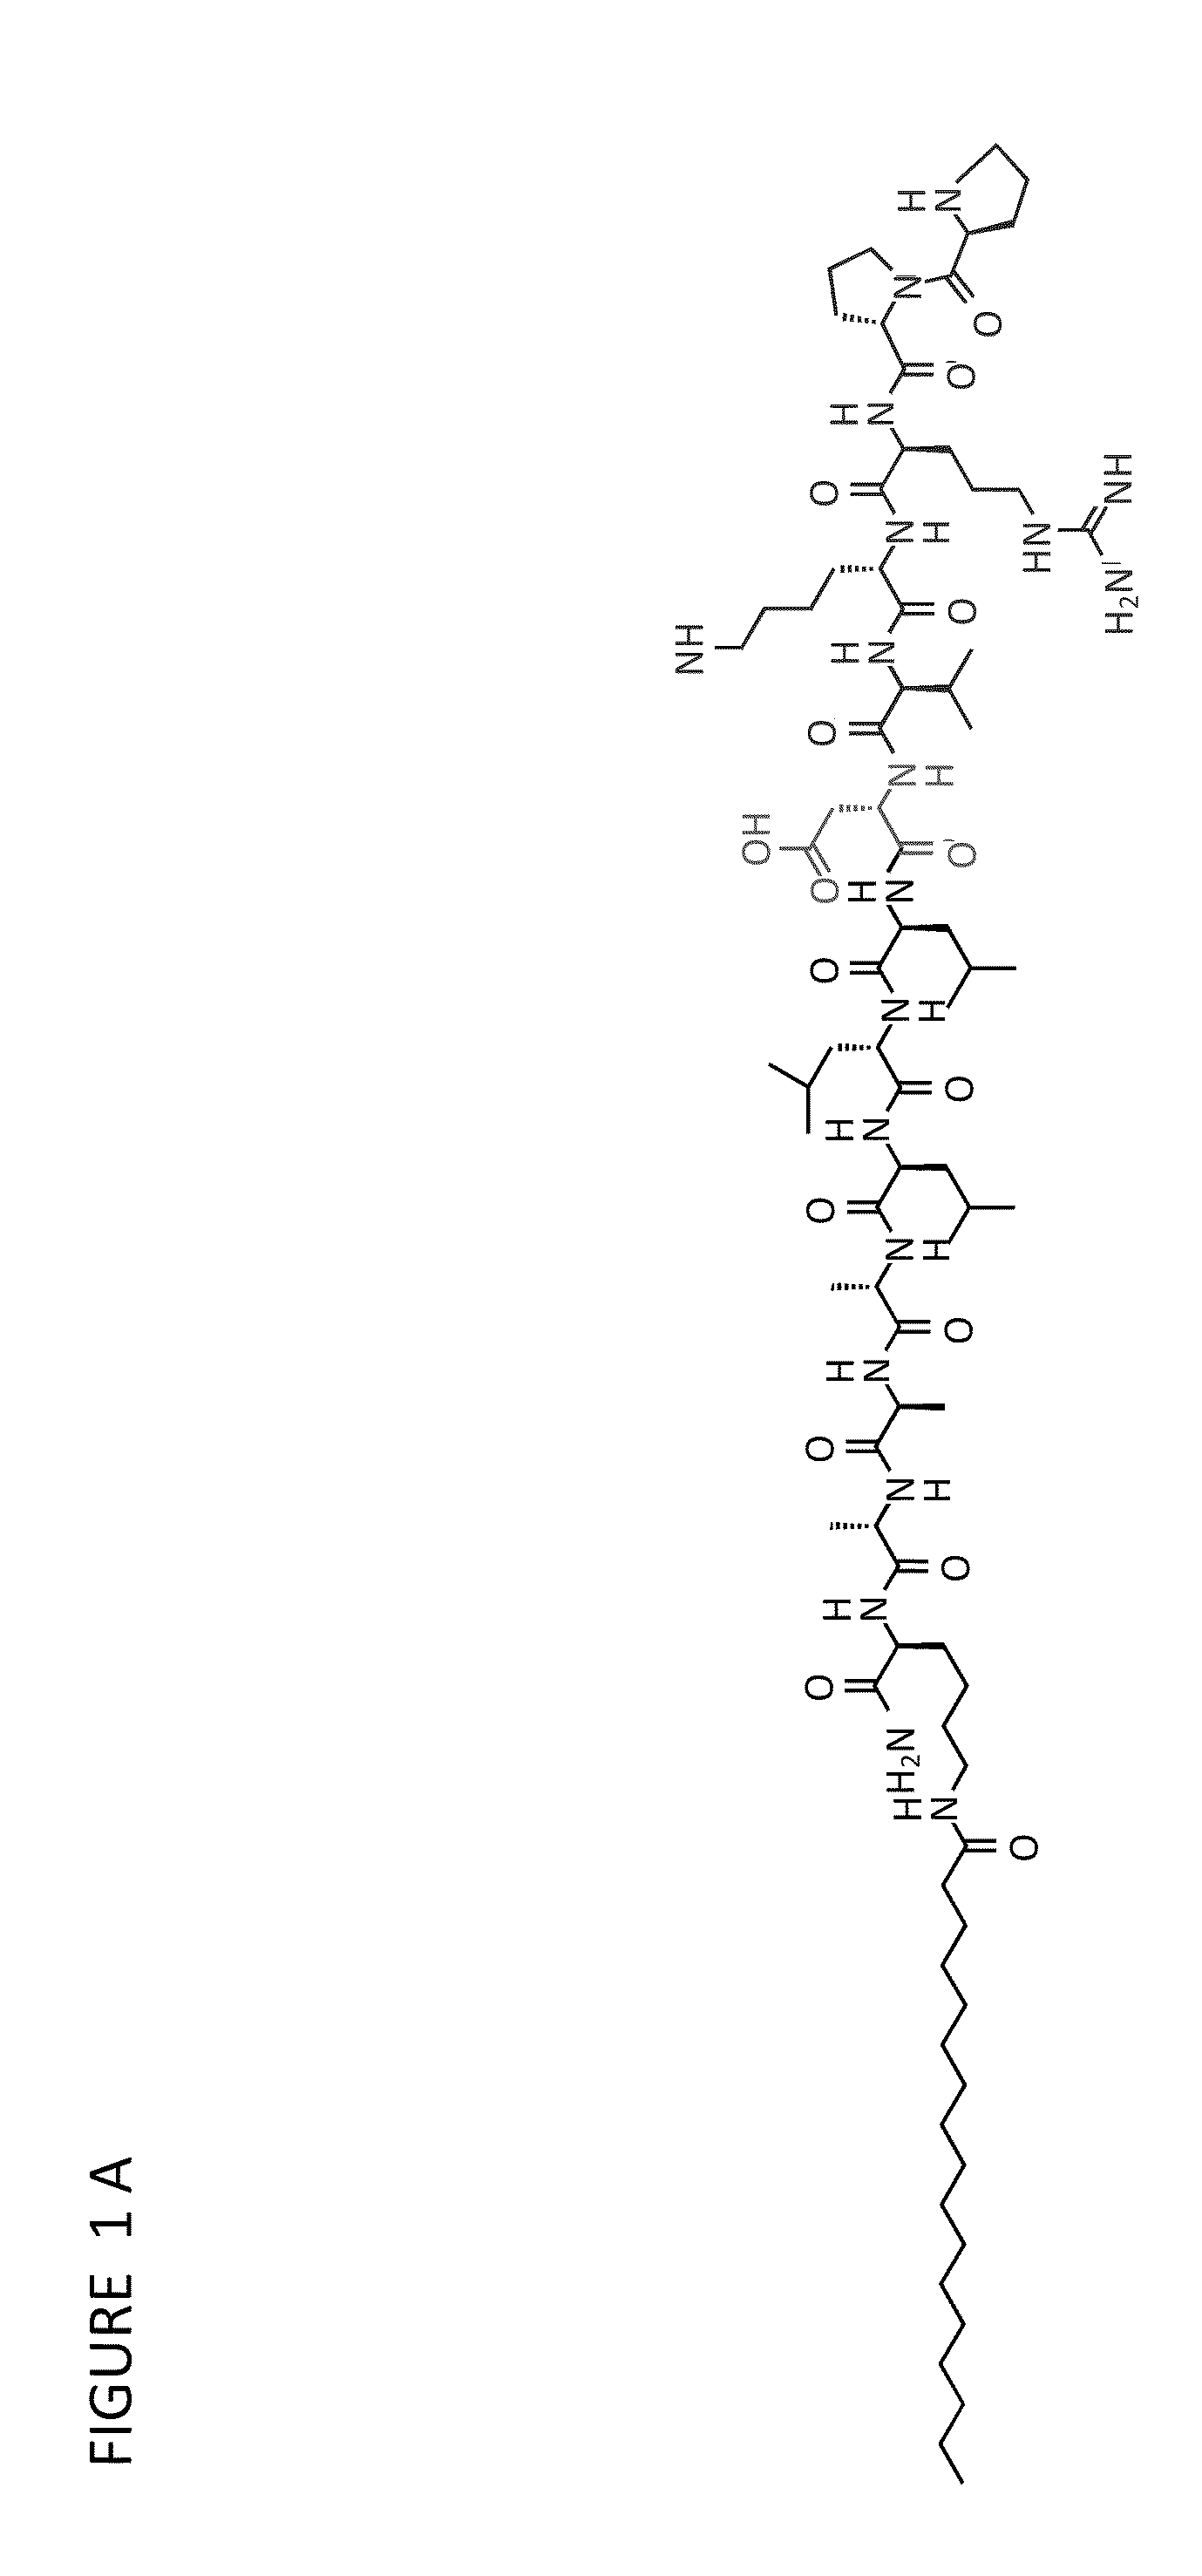 Self assembling peptide systems and methods